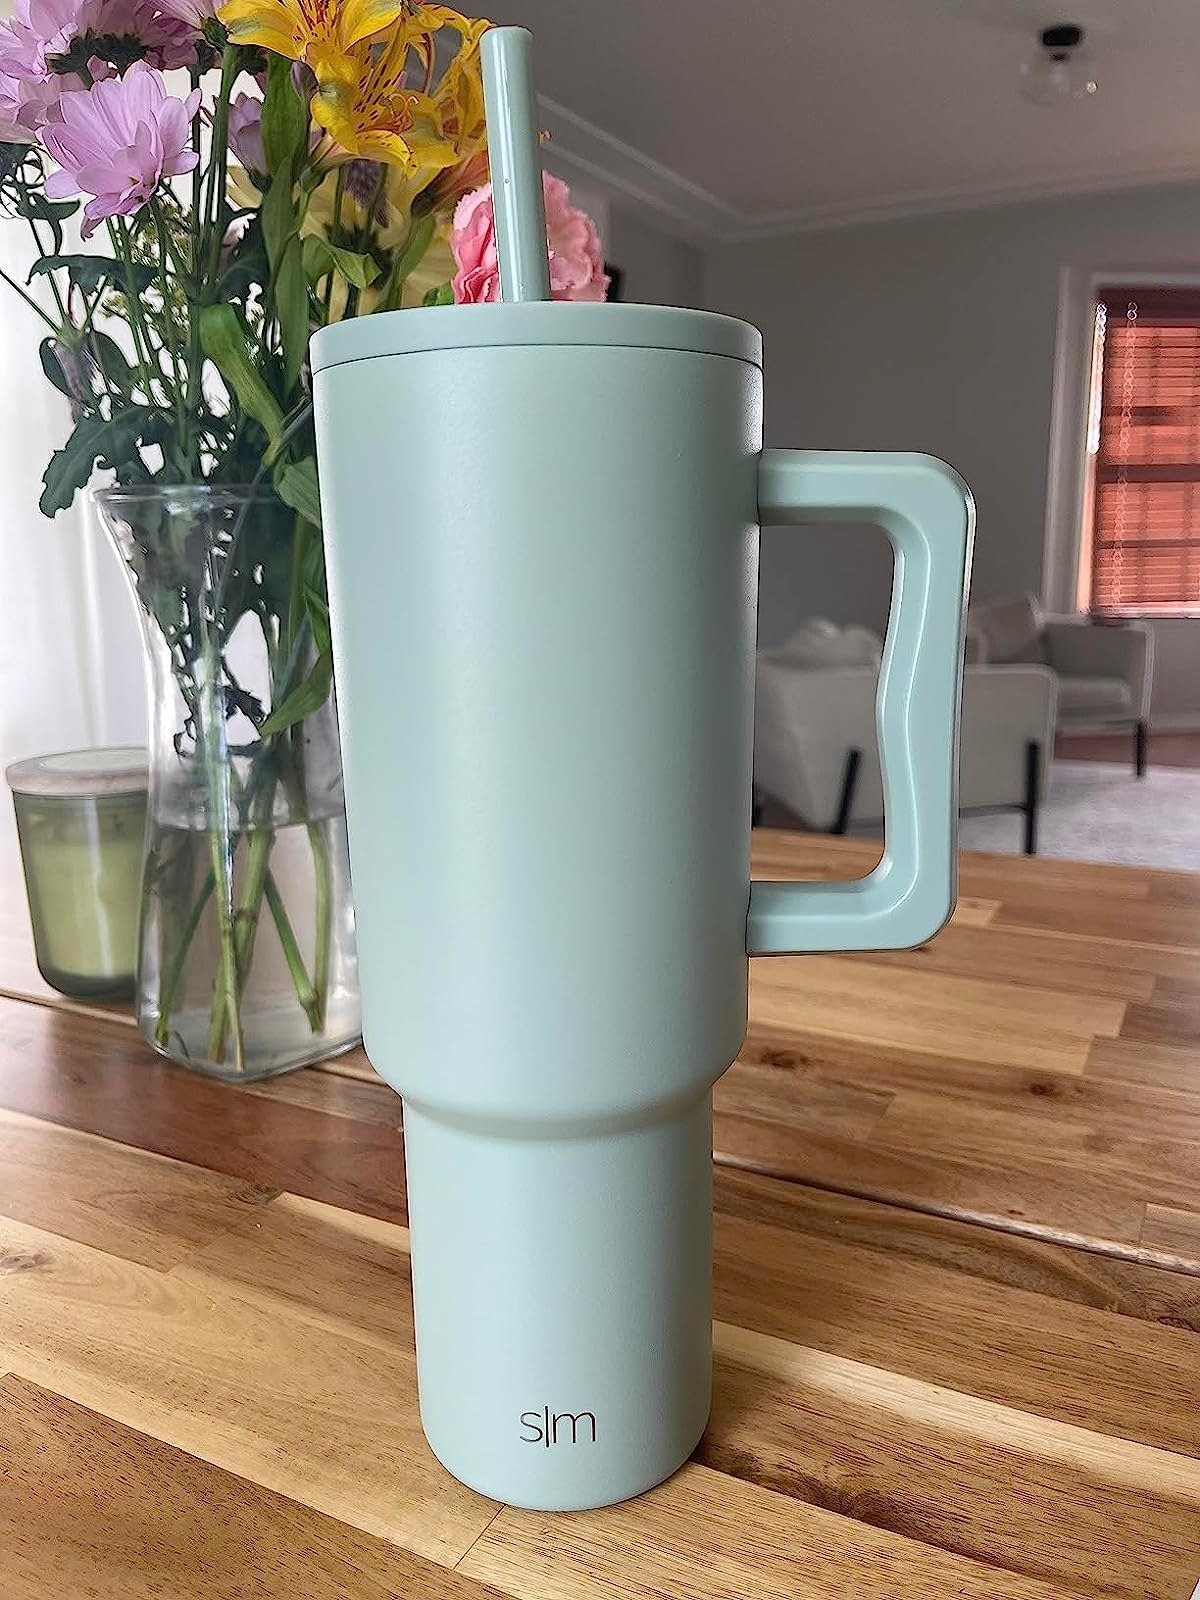 The teal tumbler with straw